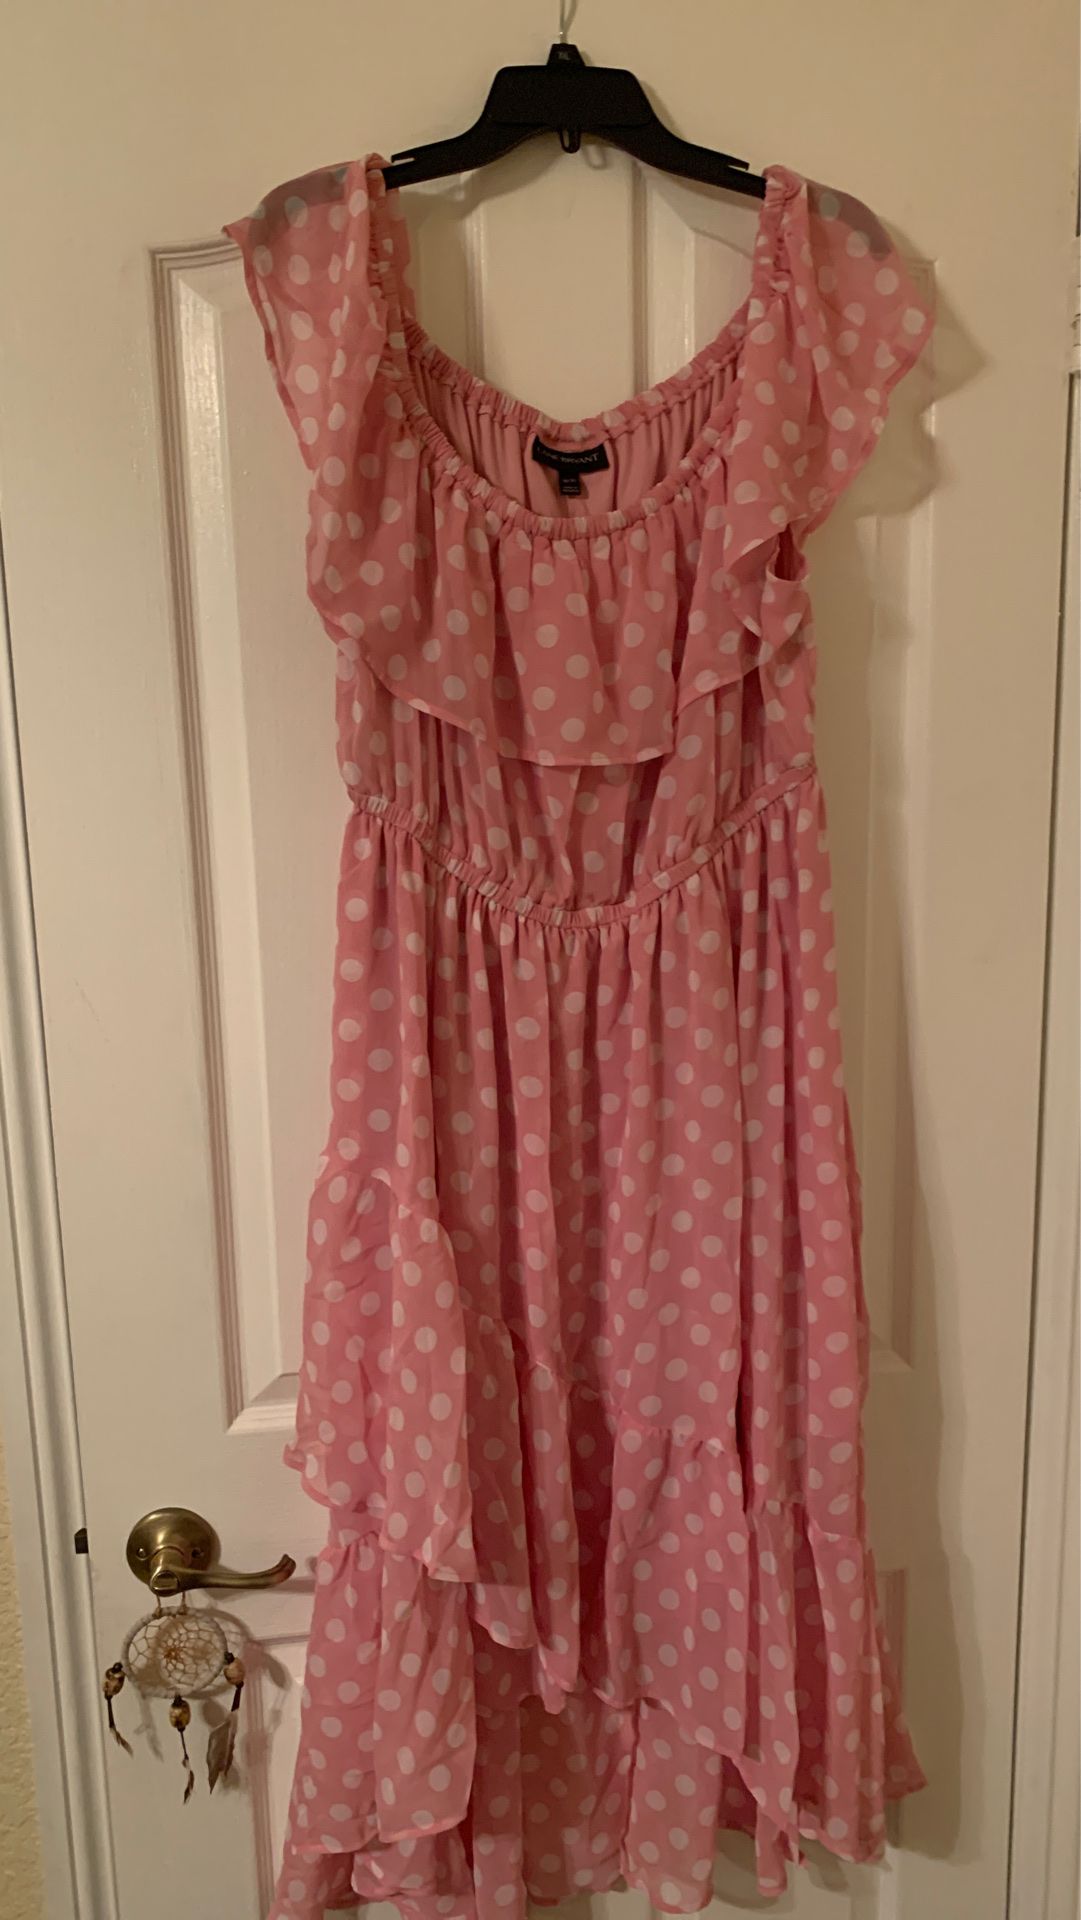 Brand New Pink and White Polka Dot Dress Size 18/20